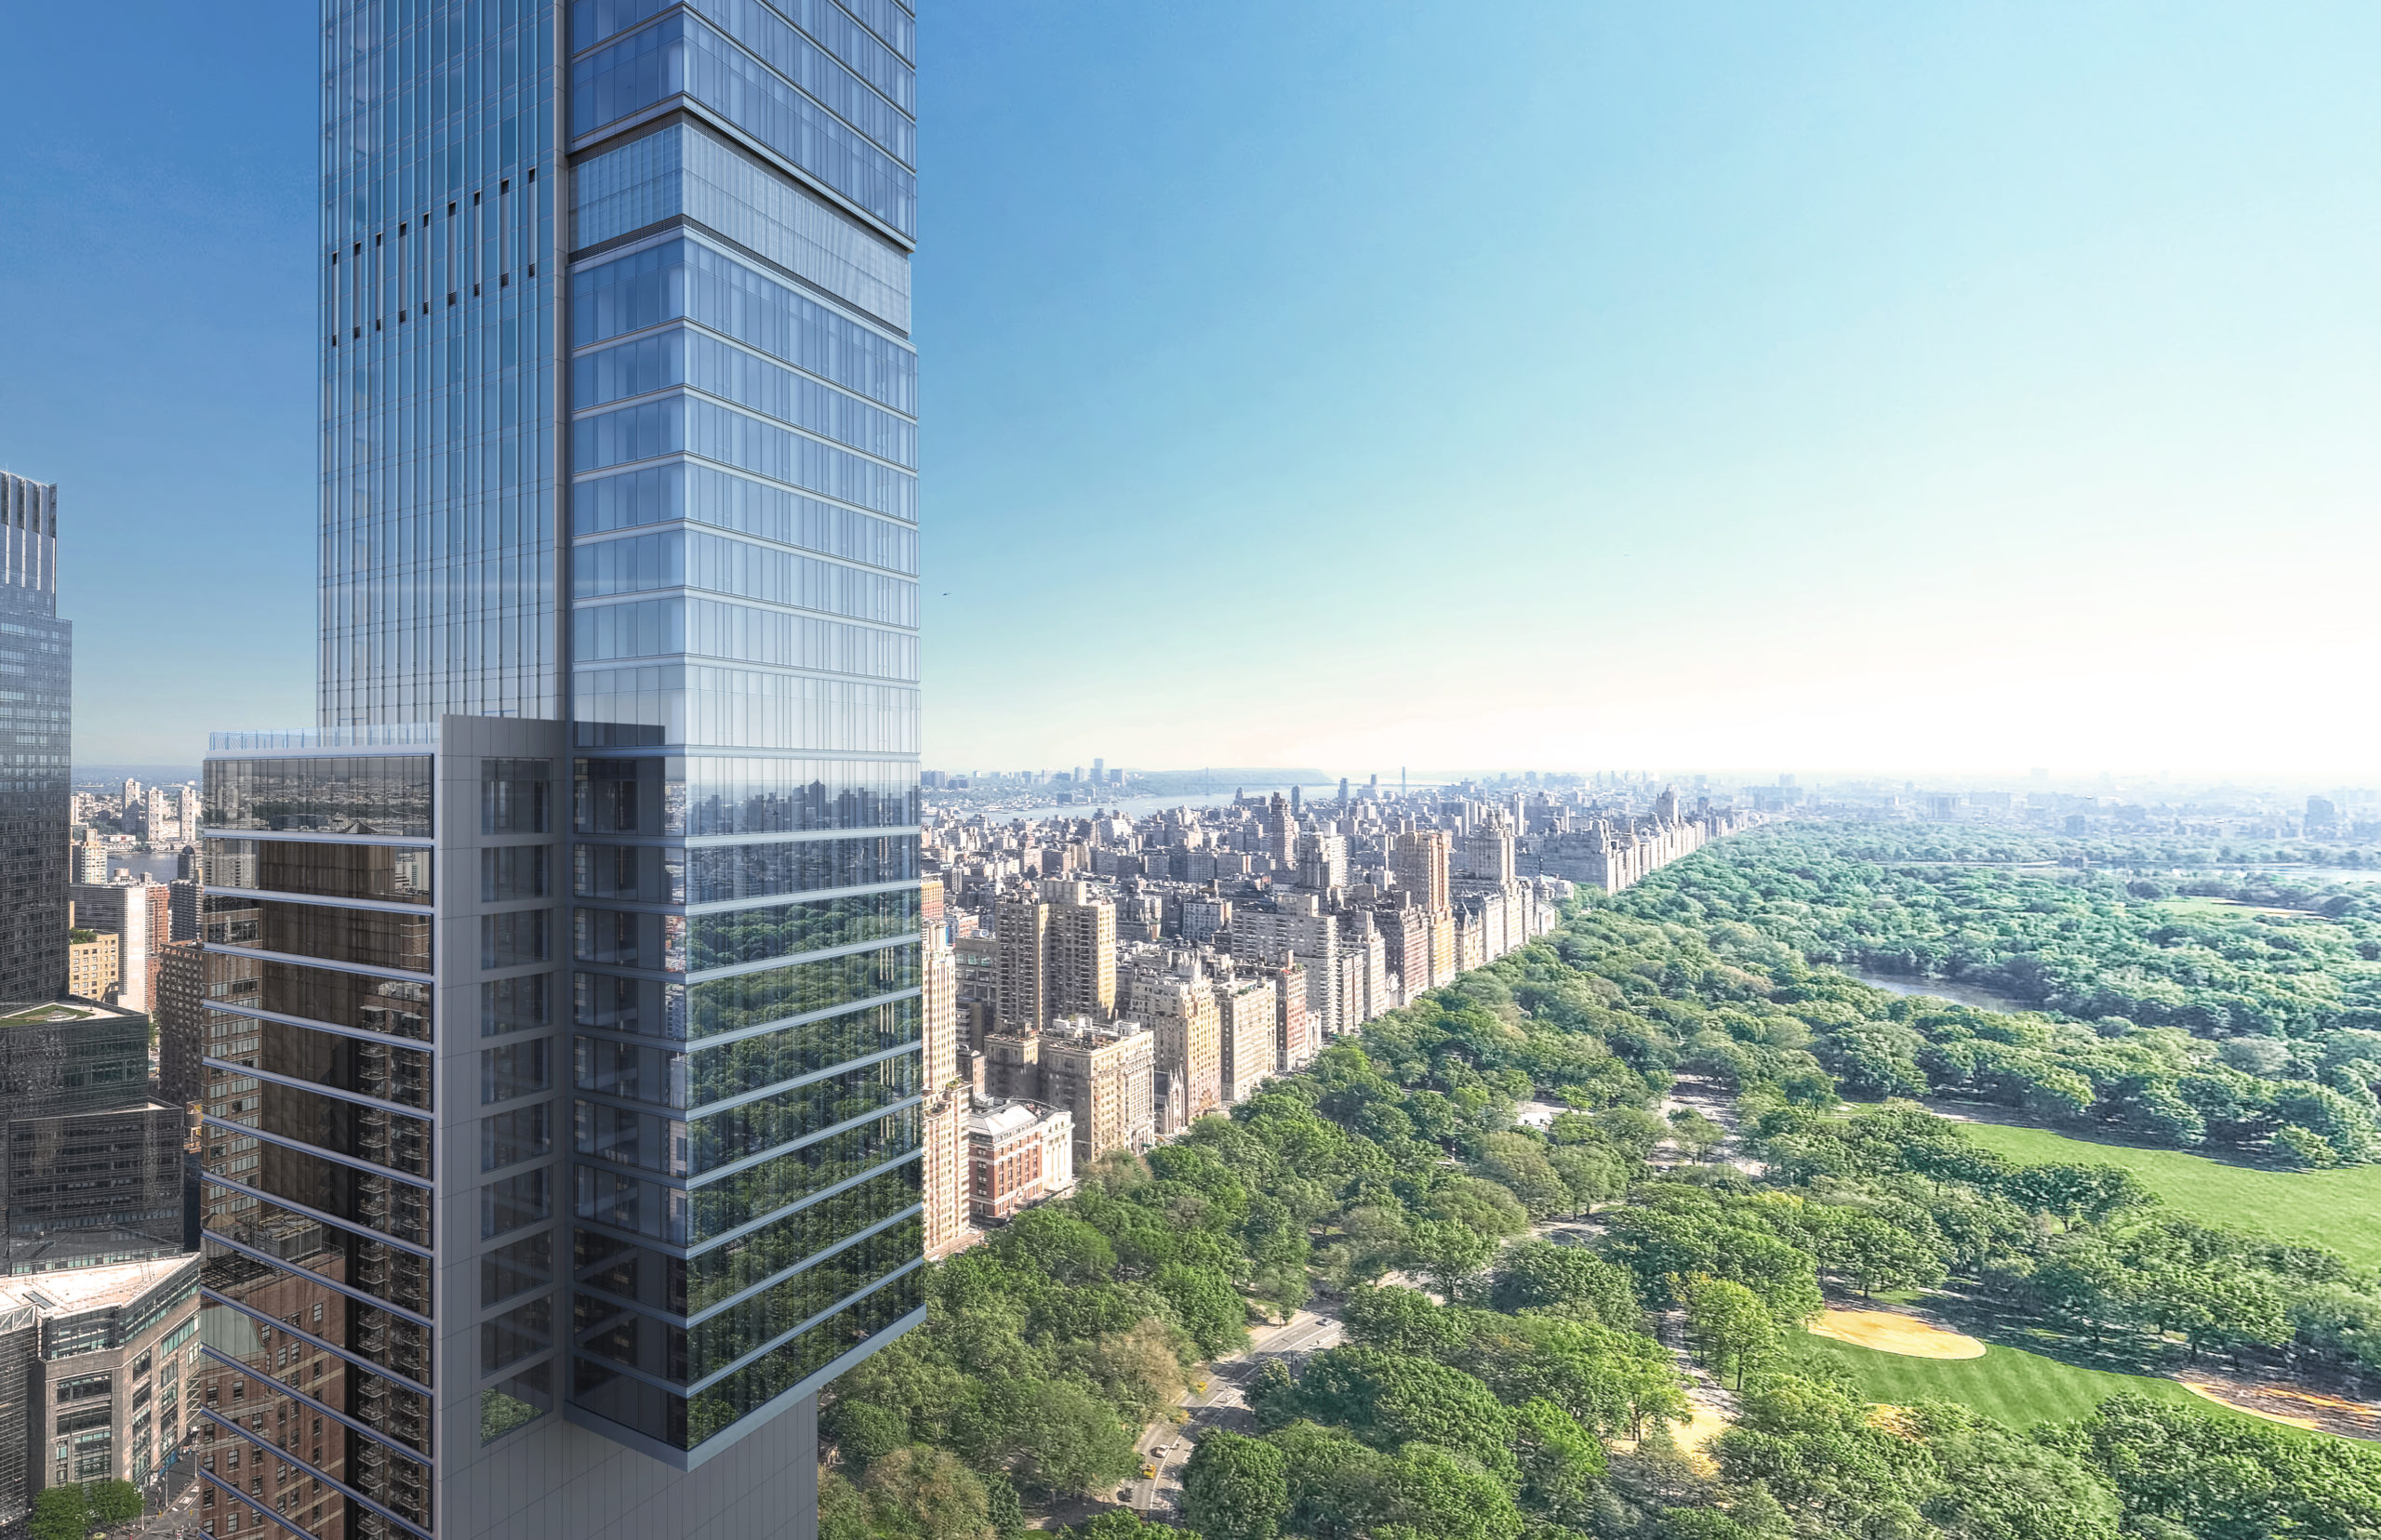 Exterior mid view of Central Park Tower condominiums in New York City and Central Park in the background.